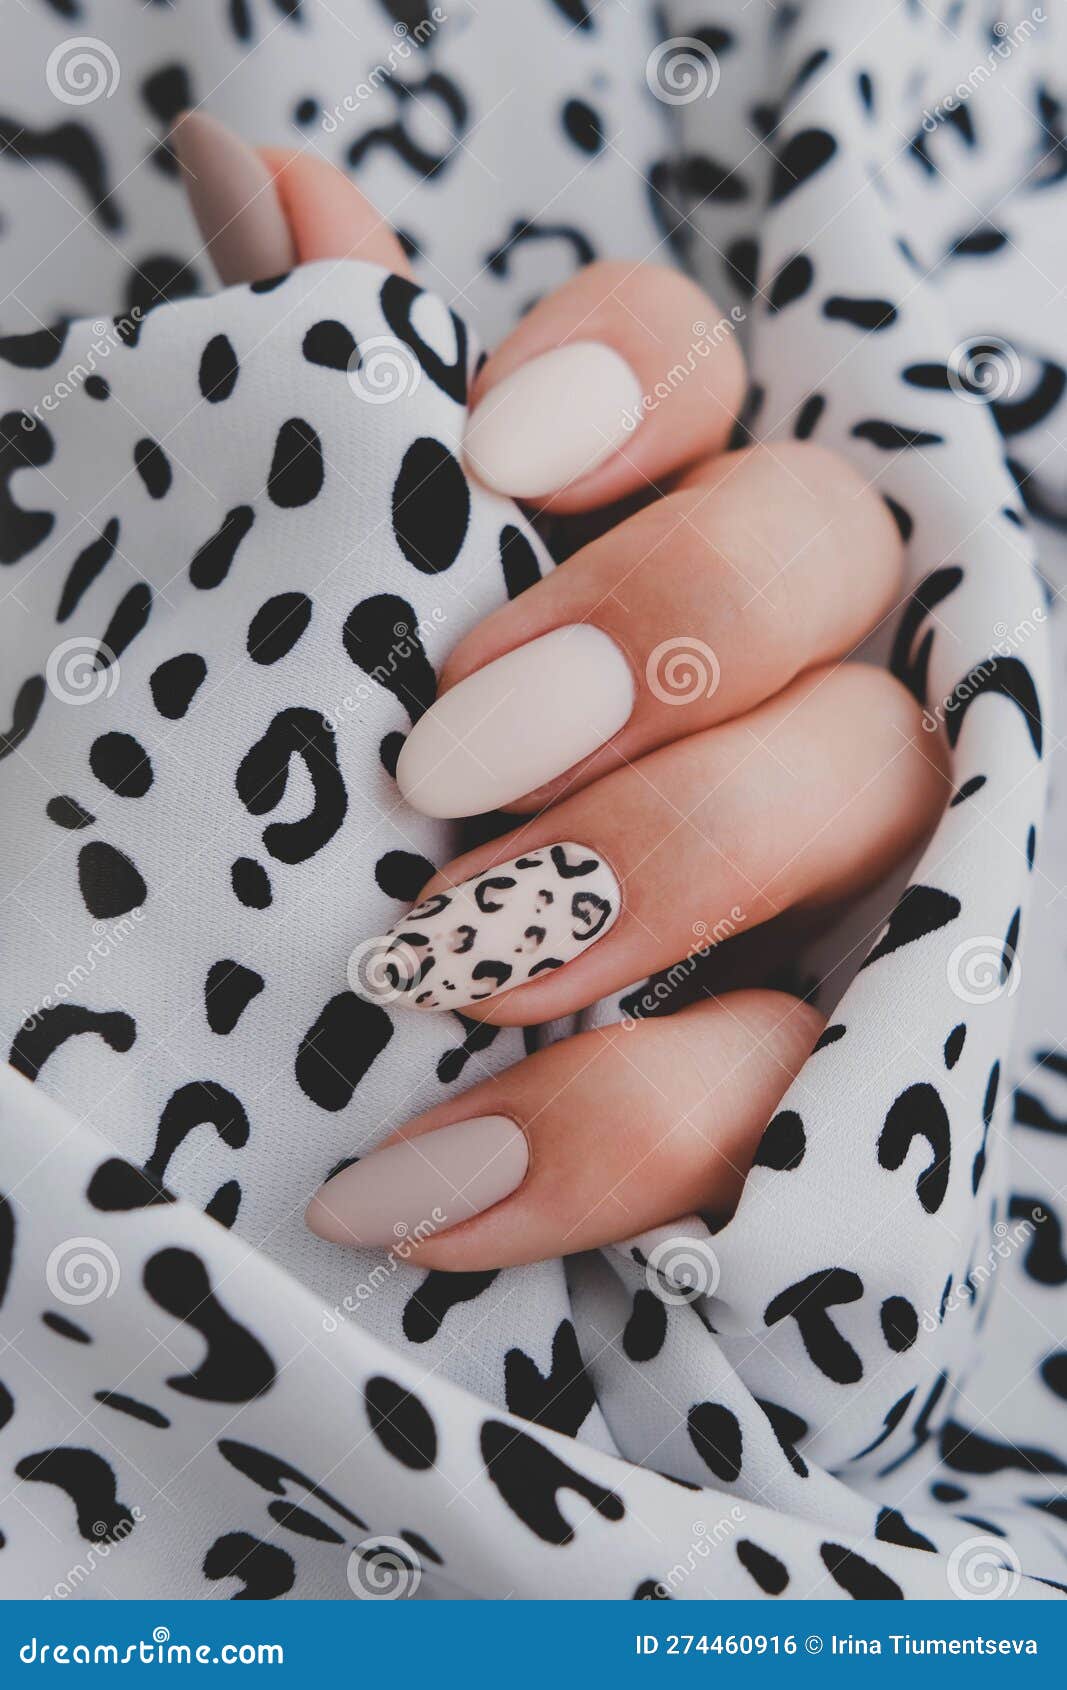 Animal Print Nails Are Everywhere RN and We're Fully Obsessed | Makeup.com